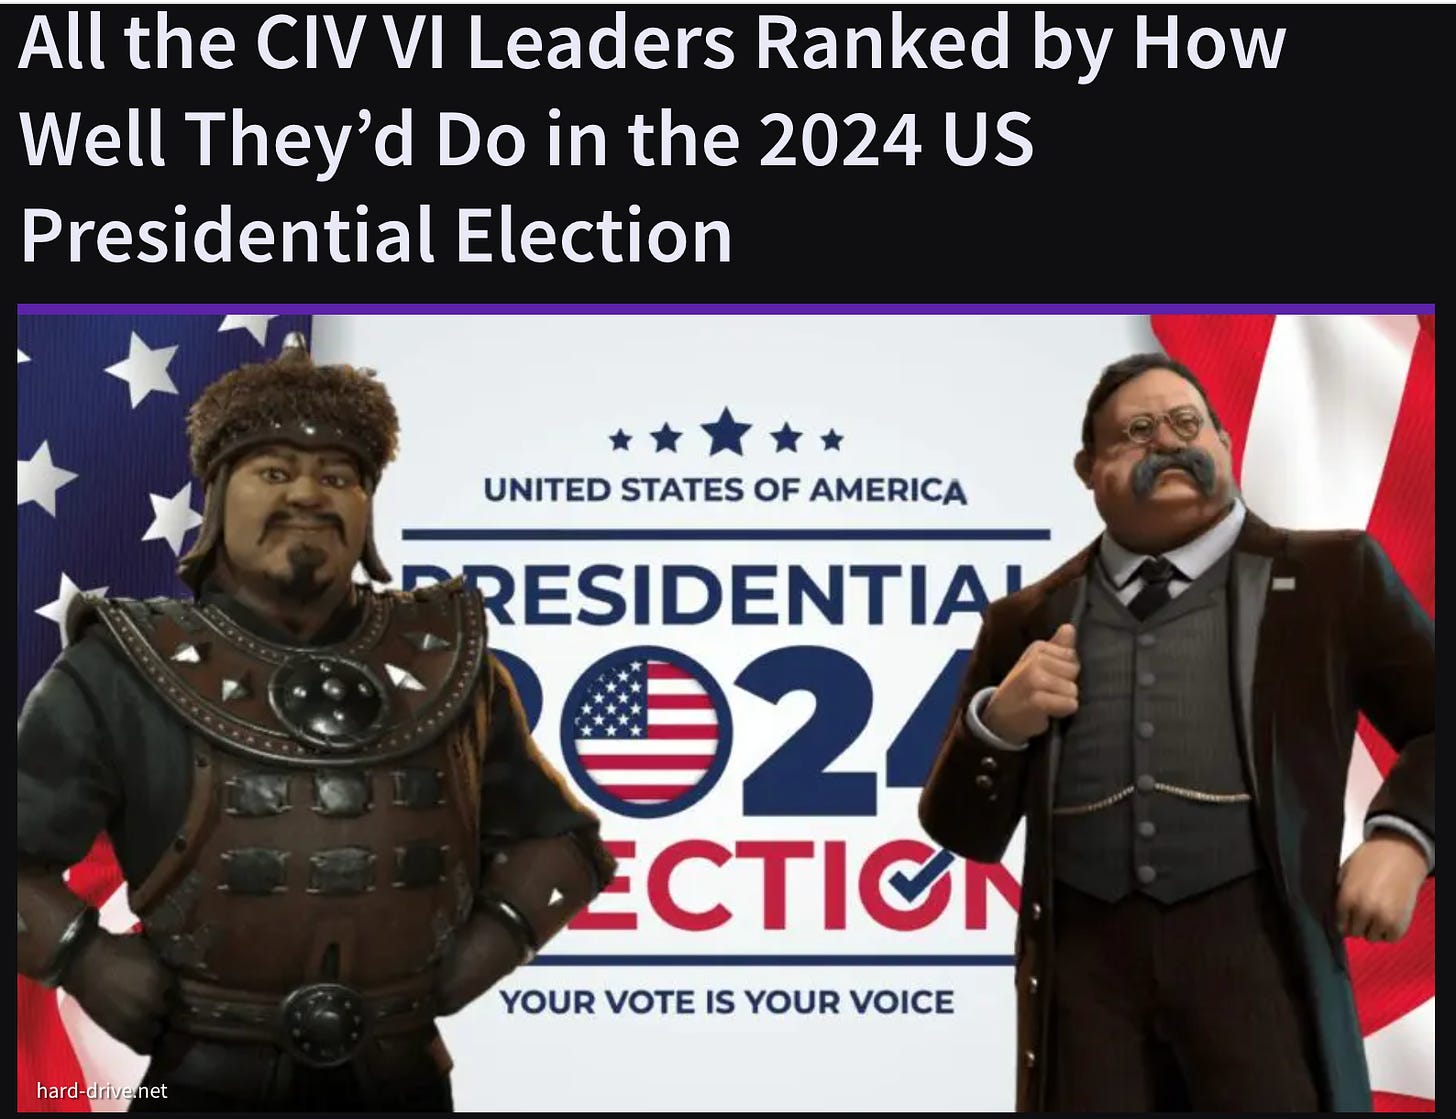 Headline and featured image from Hard Drive piece; image has Genghis Khan and Teddy Roosevelt standing in front of an American flag background with a 2024 presidential election logo in the center.